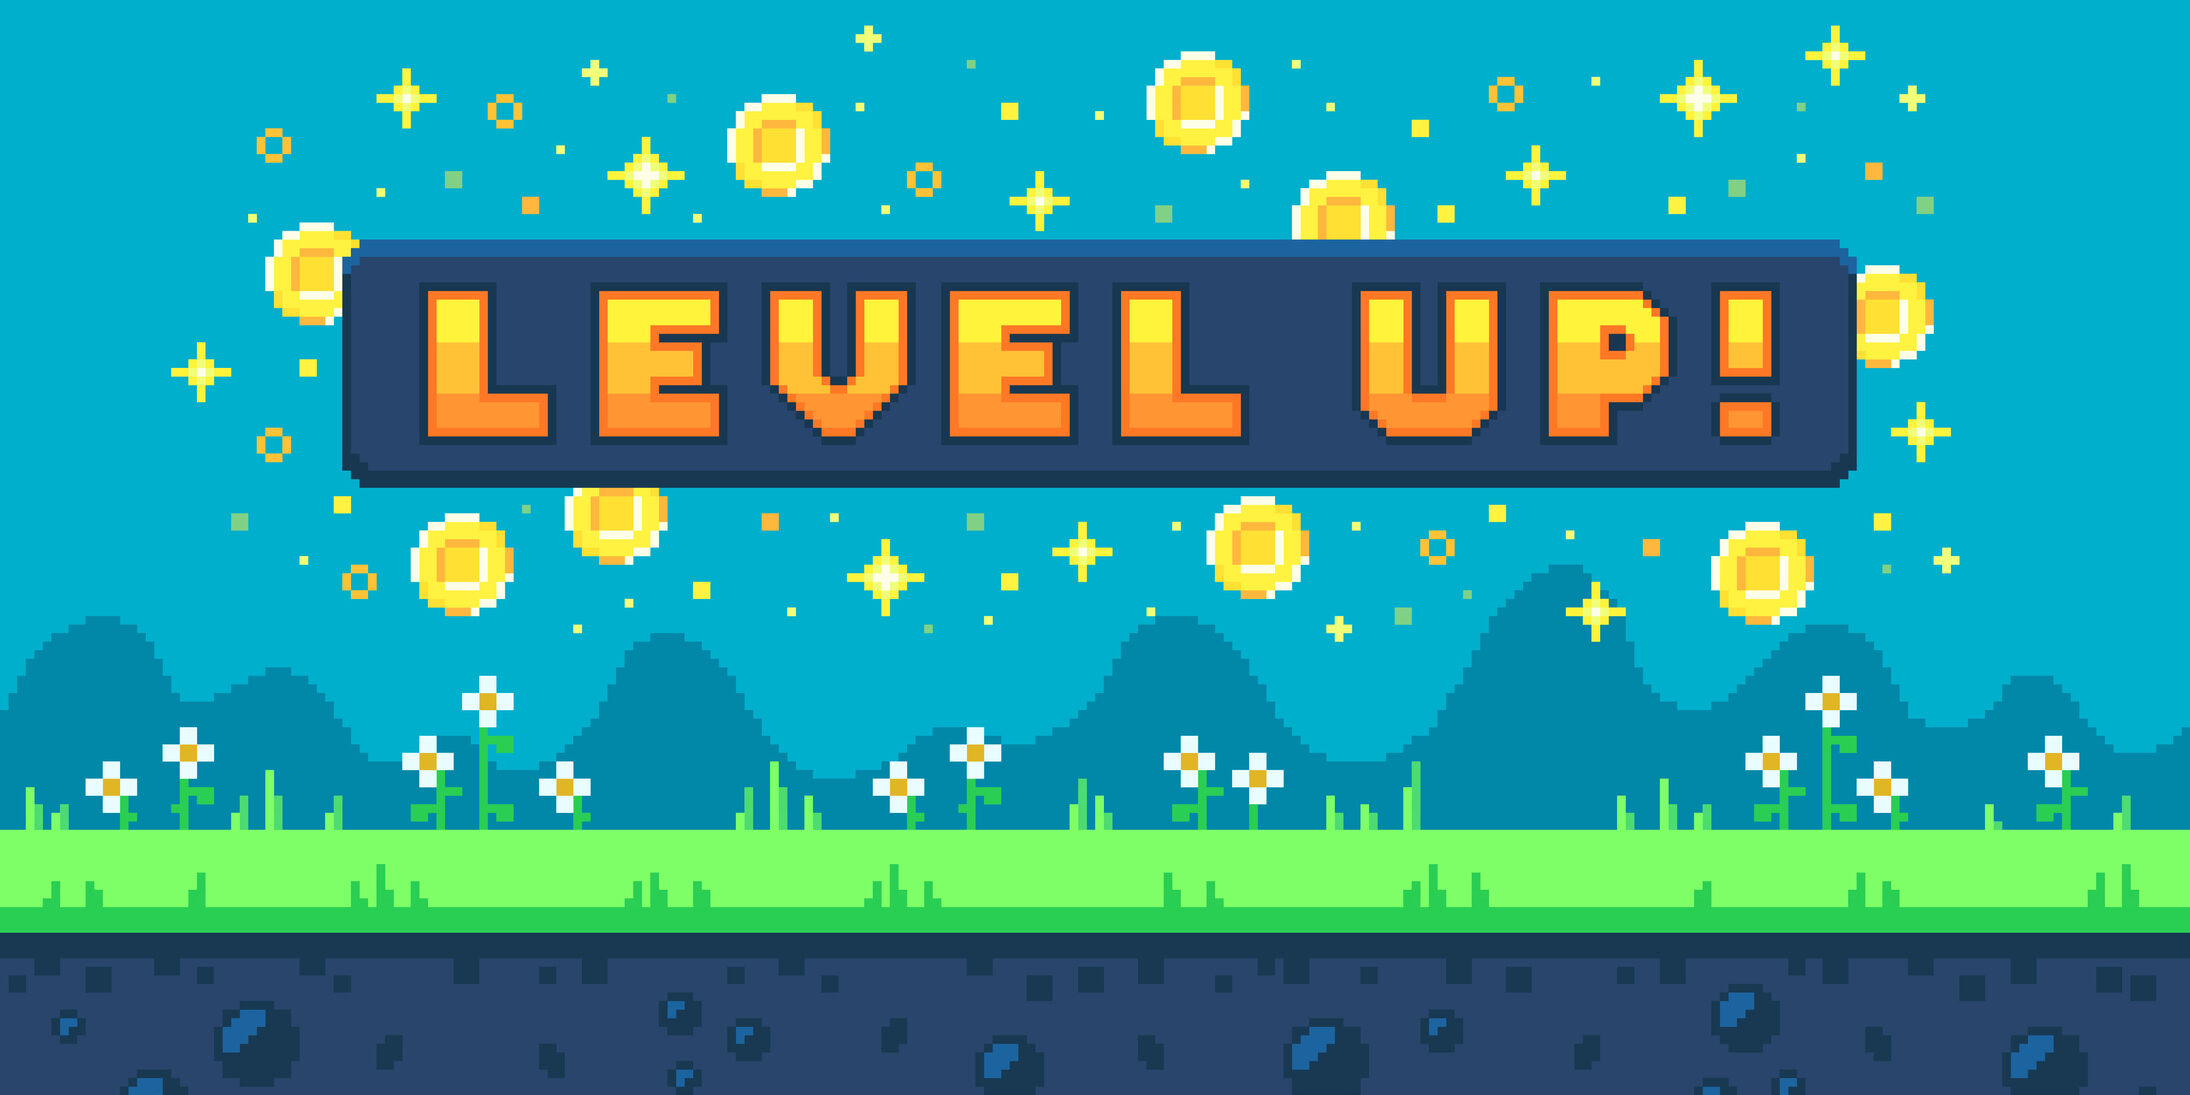 Pixel art design with outdoor landscape background. Colorful pixel arcade screen for game design. Banner with button level up. Game design concept in retro style. Vector illustration.